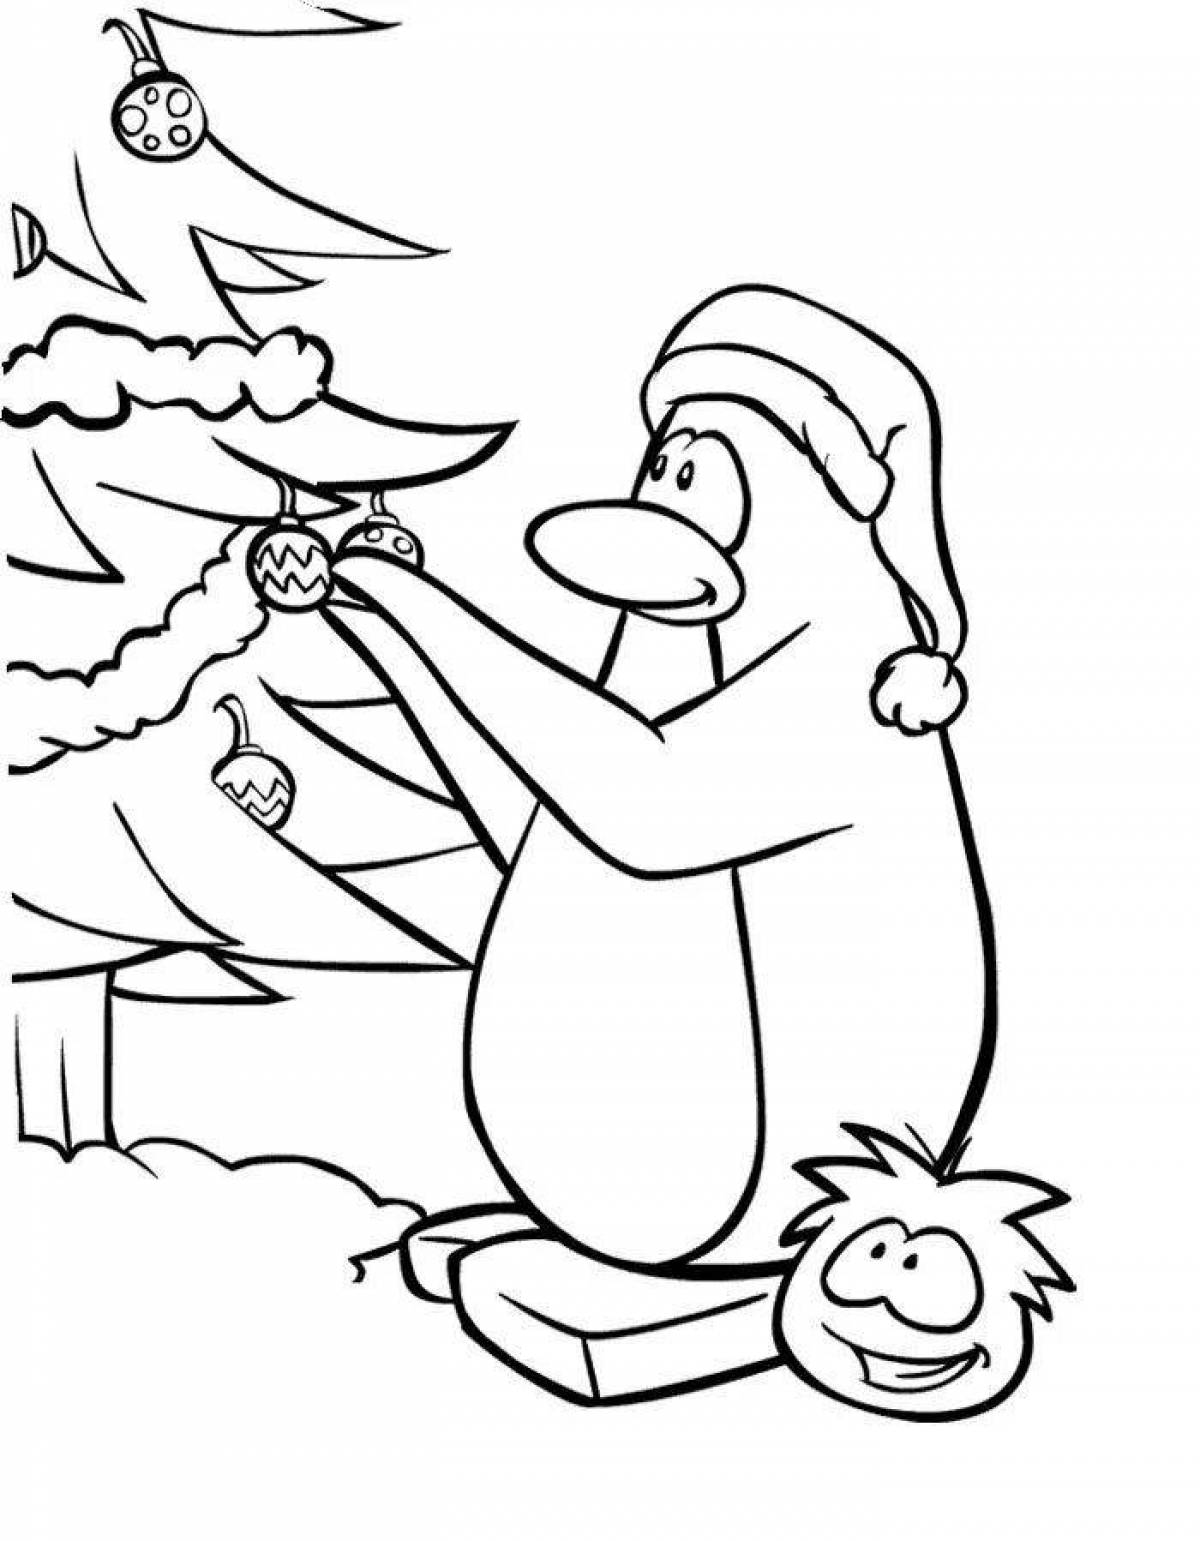 Adorable Christmas penguin coloring page